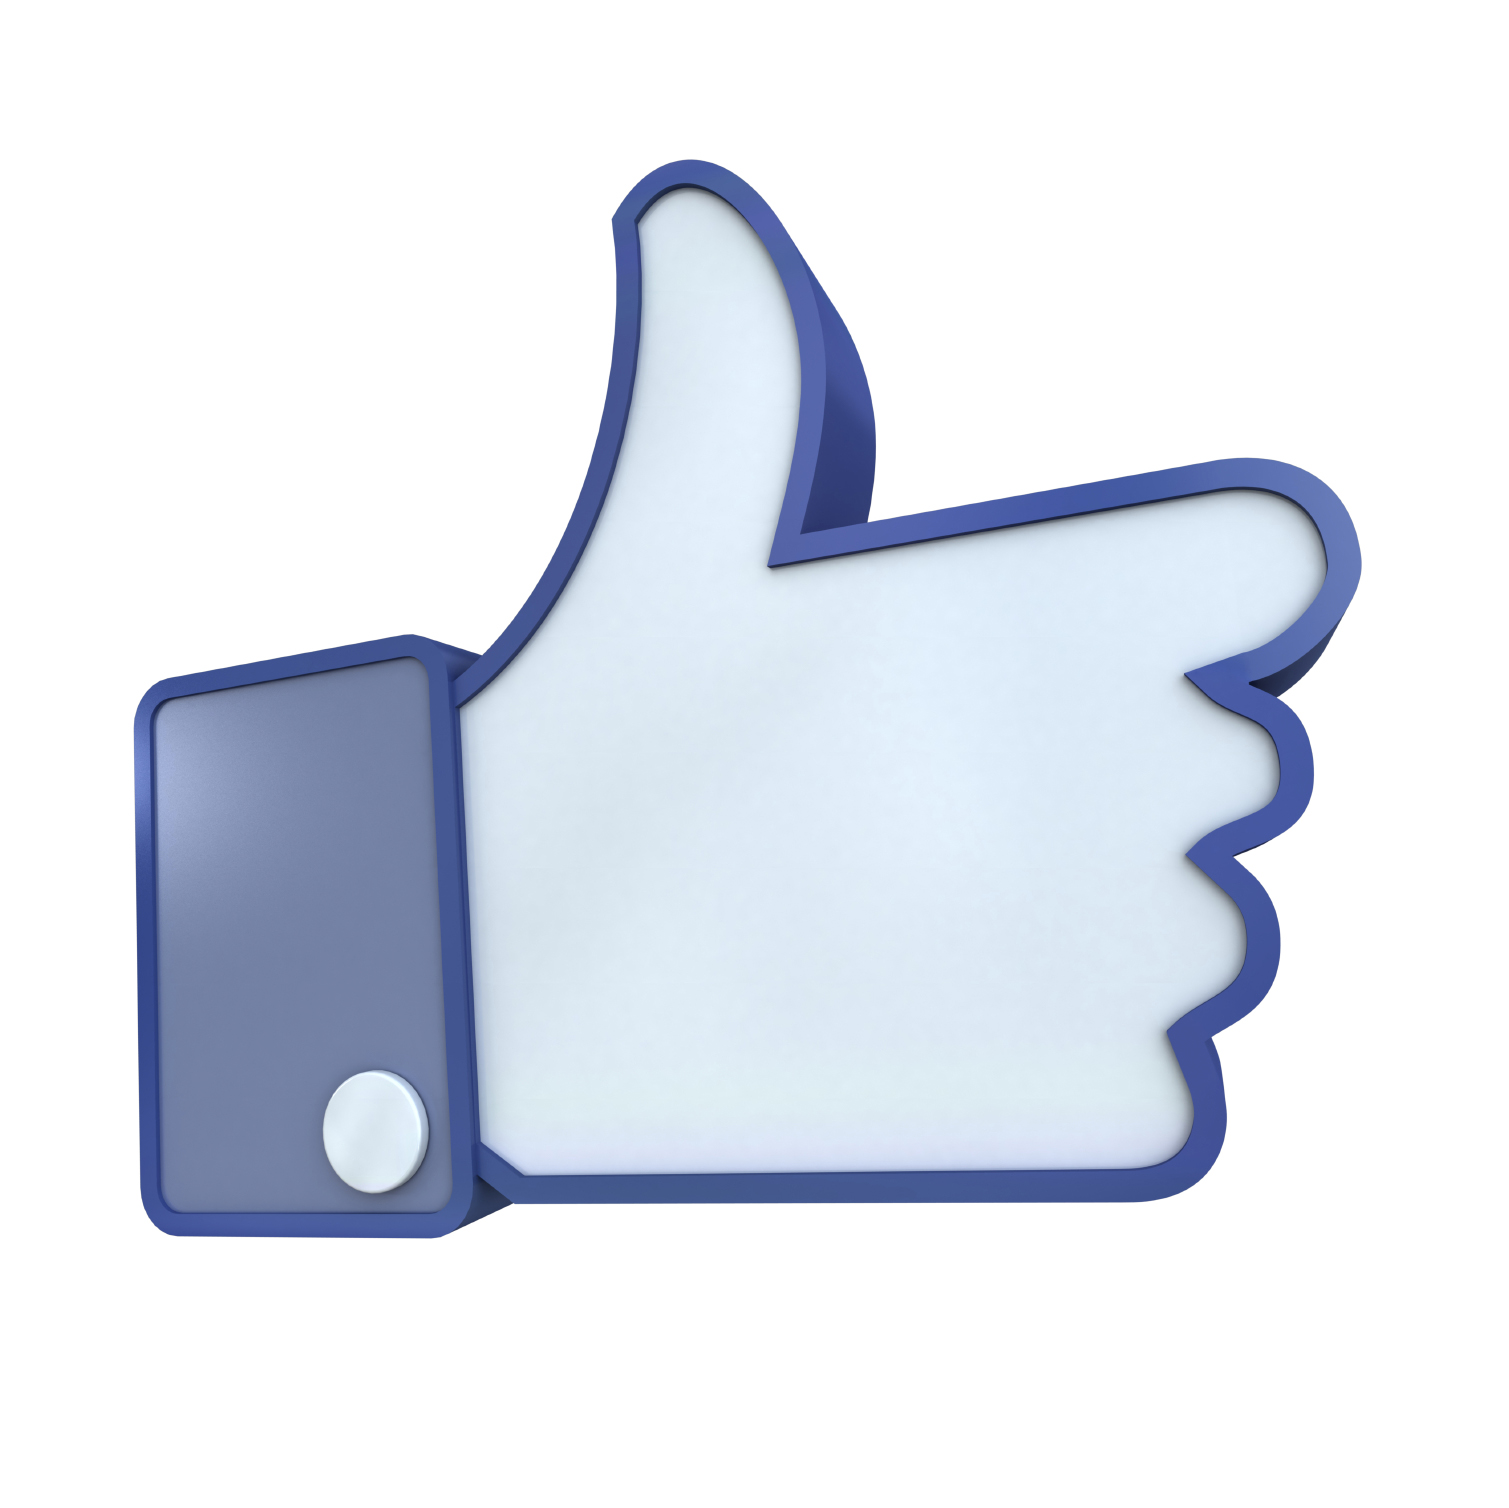 Thumbs Up Emoticon Facebook - ClipArt Best